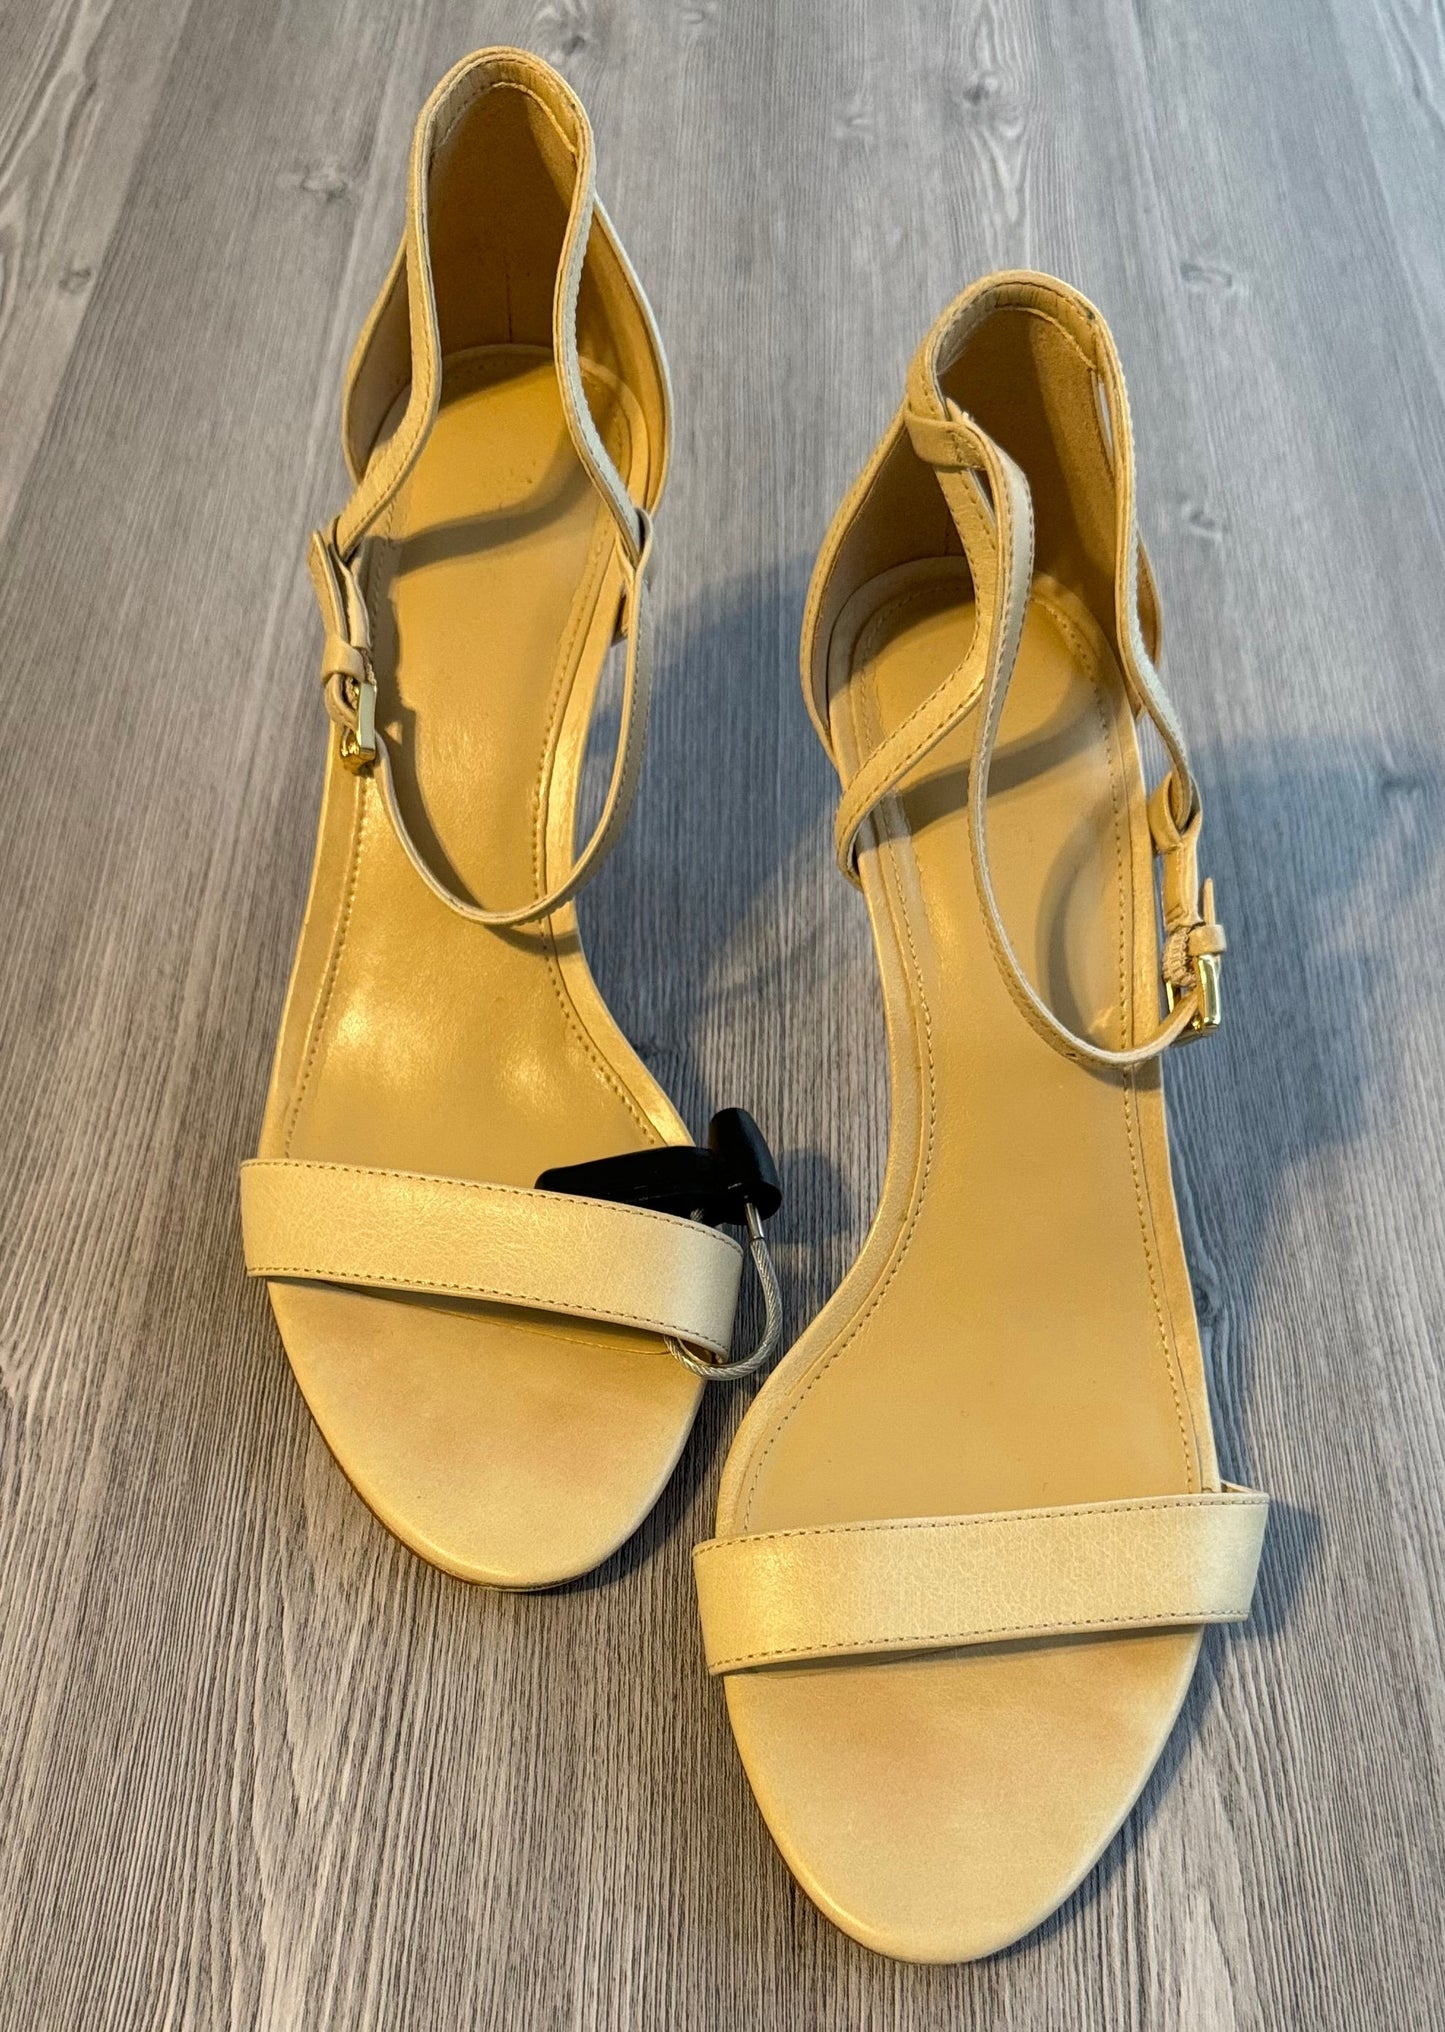 Shoes Heels Stiletto By Michael Kors  Size: 8.5